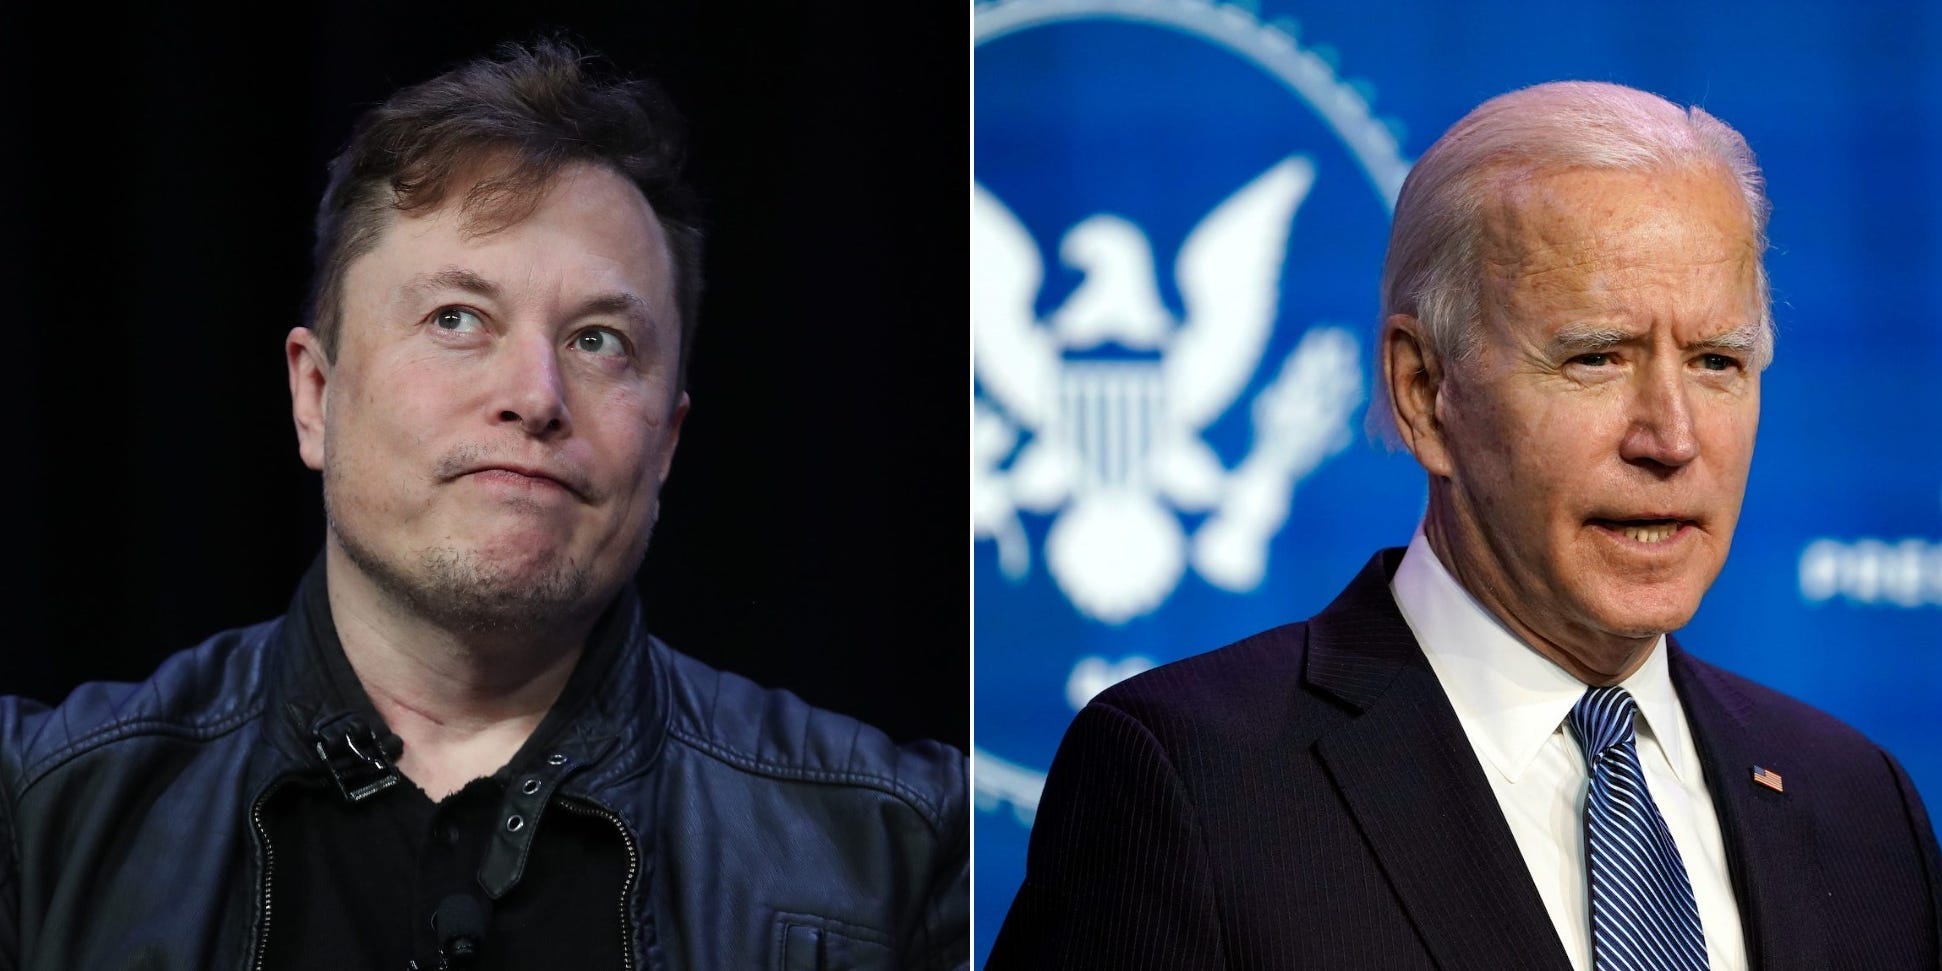 Elon Musk said the Biden administration rejected his idea of a carbon tax as ‘too politically difficult’